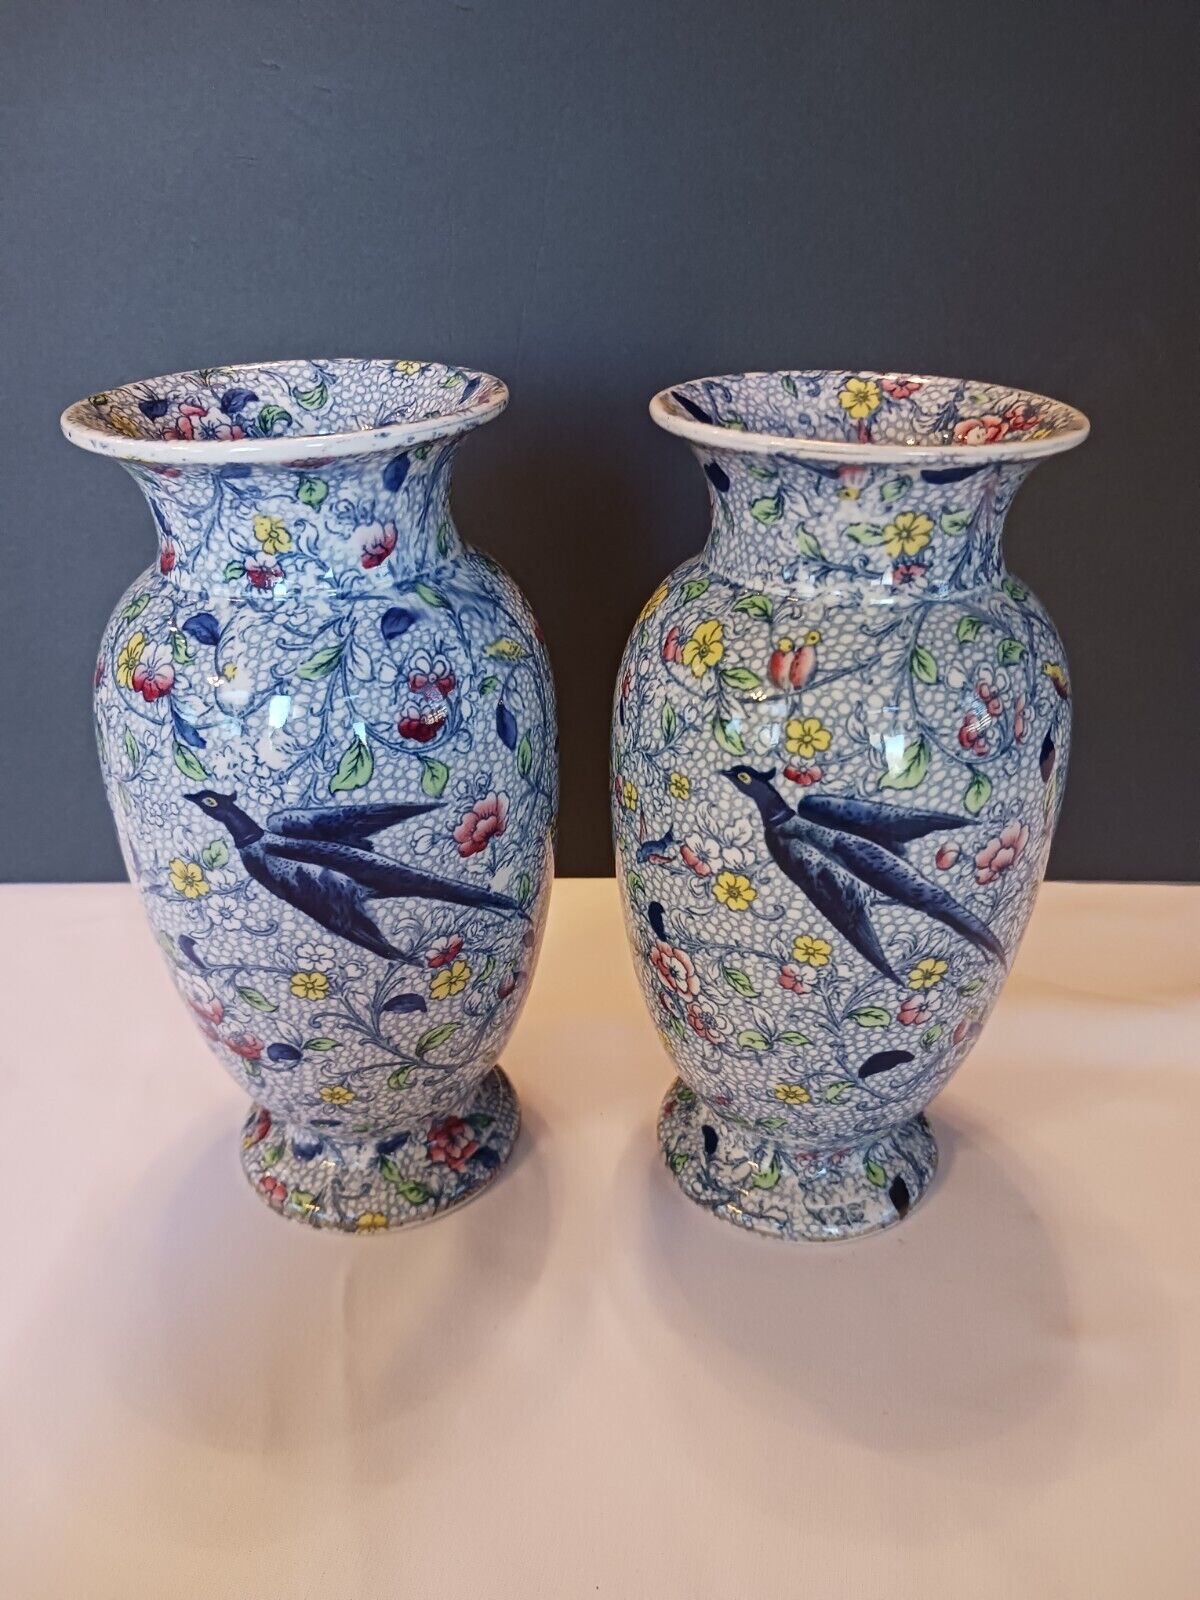 Antique Late 1800s Early 1900s BRIDGWOOD And Sons Chintz Blue Bird Vase Lot Engl